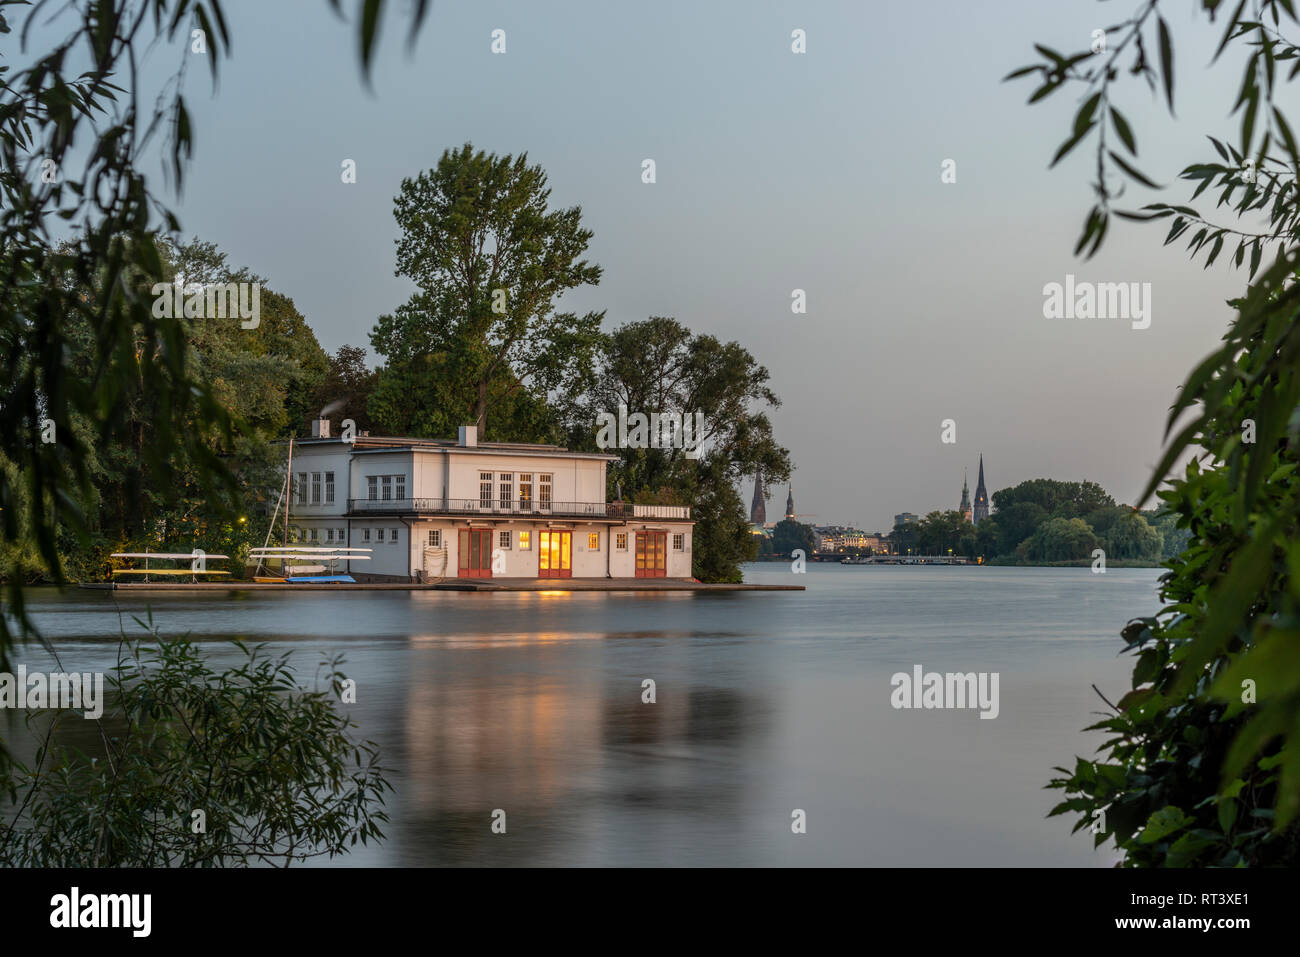 Germany, Hamburg, Building at the Outer Alster Lake Stock Photo